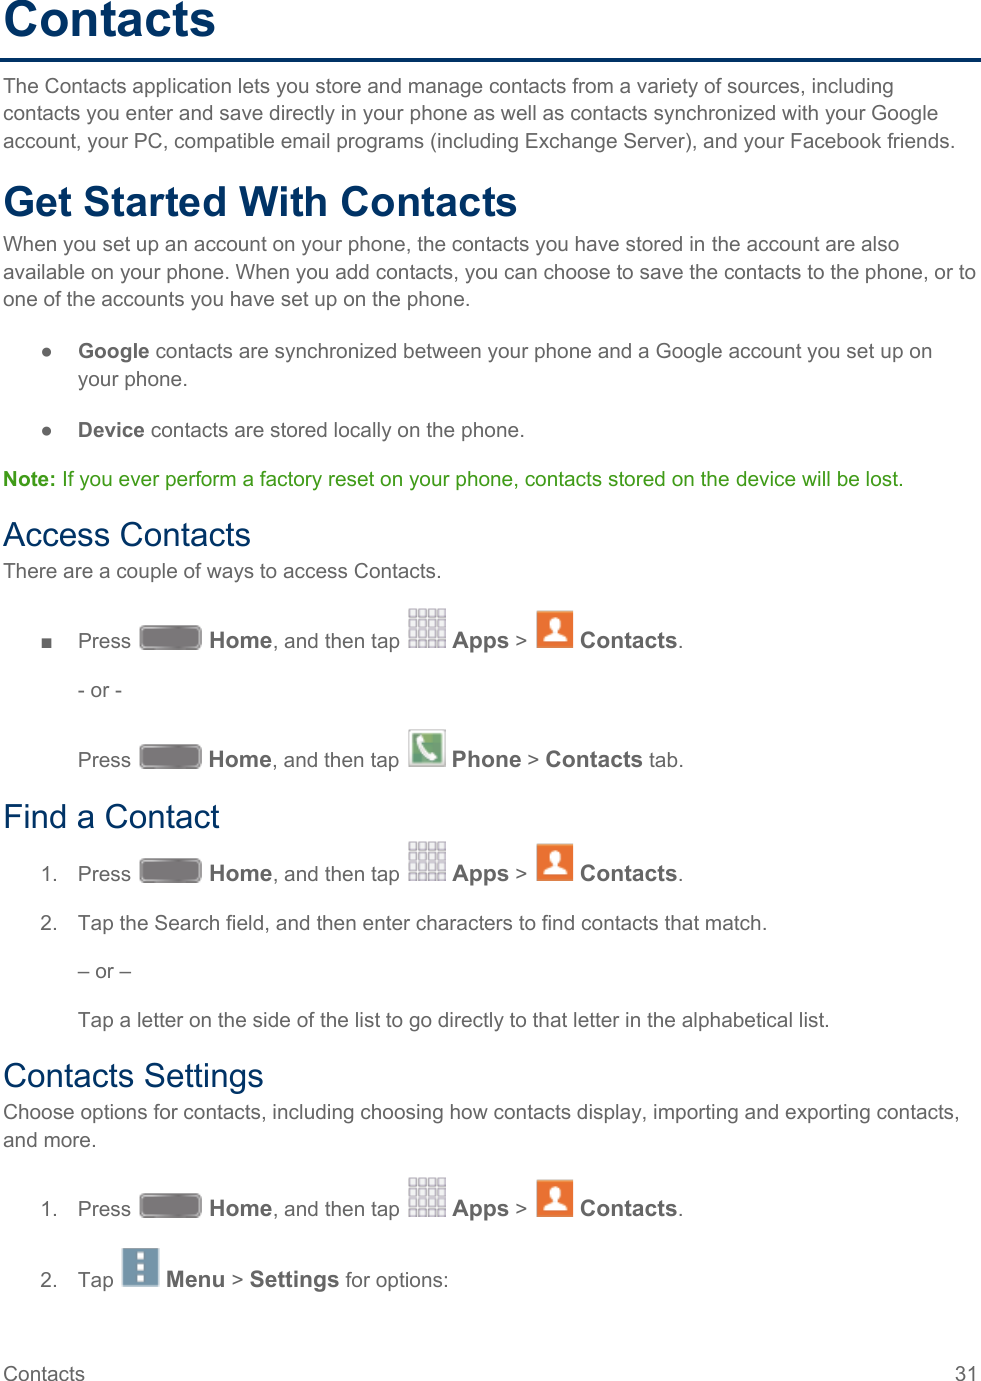  Contacts The Contacts application lets you store and manage contacts from a variety of sources, including contacts you enter and save directly in your phone as well as contacts synchronized with your Google account, your PC, compatible email programs (including Exchange Server), and your Facebook friends. Get Started With Contacts When you set up an account on your phone, the contacts you have stored in the account are also available on your phone. When you add contacts, you can choose to save the contacts to the phone, or to one of the accounts you have set up on the phone. ● Google contacts are synchronized between your phone and a Google account you set up on your phone. ● Device contacts are stored locally on the phone. Note: If you ever perform a factory reset on your phone, contacts stored on the device will be lost. Access Contacts There are a couple of ways to access Contacts. ■  Press   Home, and then tap   Apps &gt;   Contacts. - or - Press   Home, and then tap   Phone &gt; Contacts tab. Find a Contact 1. Press   Home, and then tap   Apps &gt;   Contacts. 2. Tap the Search field, and then enter characters to find contacts that match. – or – Tap a letter on the side of the list to go directly to that letter in the alphabetical list. Contacts Settings Choose options for contacts, including choosing how contacts display, importing and exporting contacts, and more. 1. Press   Home, and then tap   Apps &gt;   Contacts. 2.  Tap   Menu &gt; Settings for options: Contacts 31   